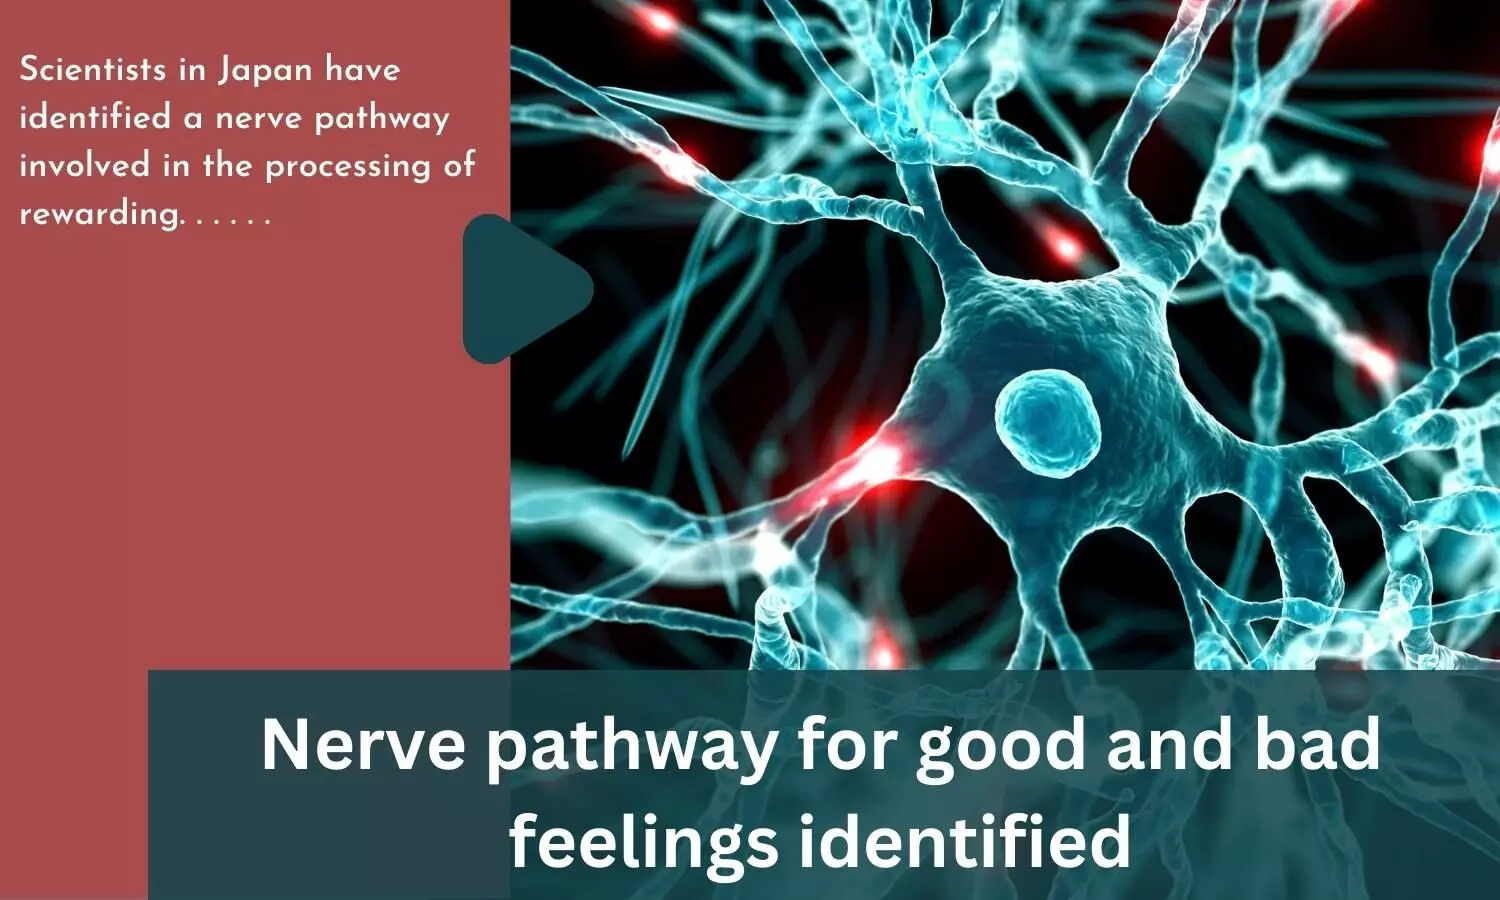 Nerve pathway for good and bad feelings identified